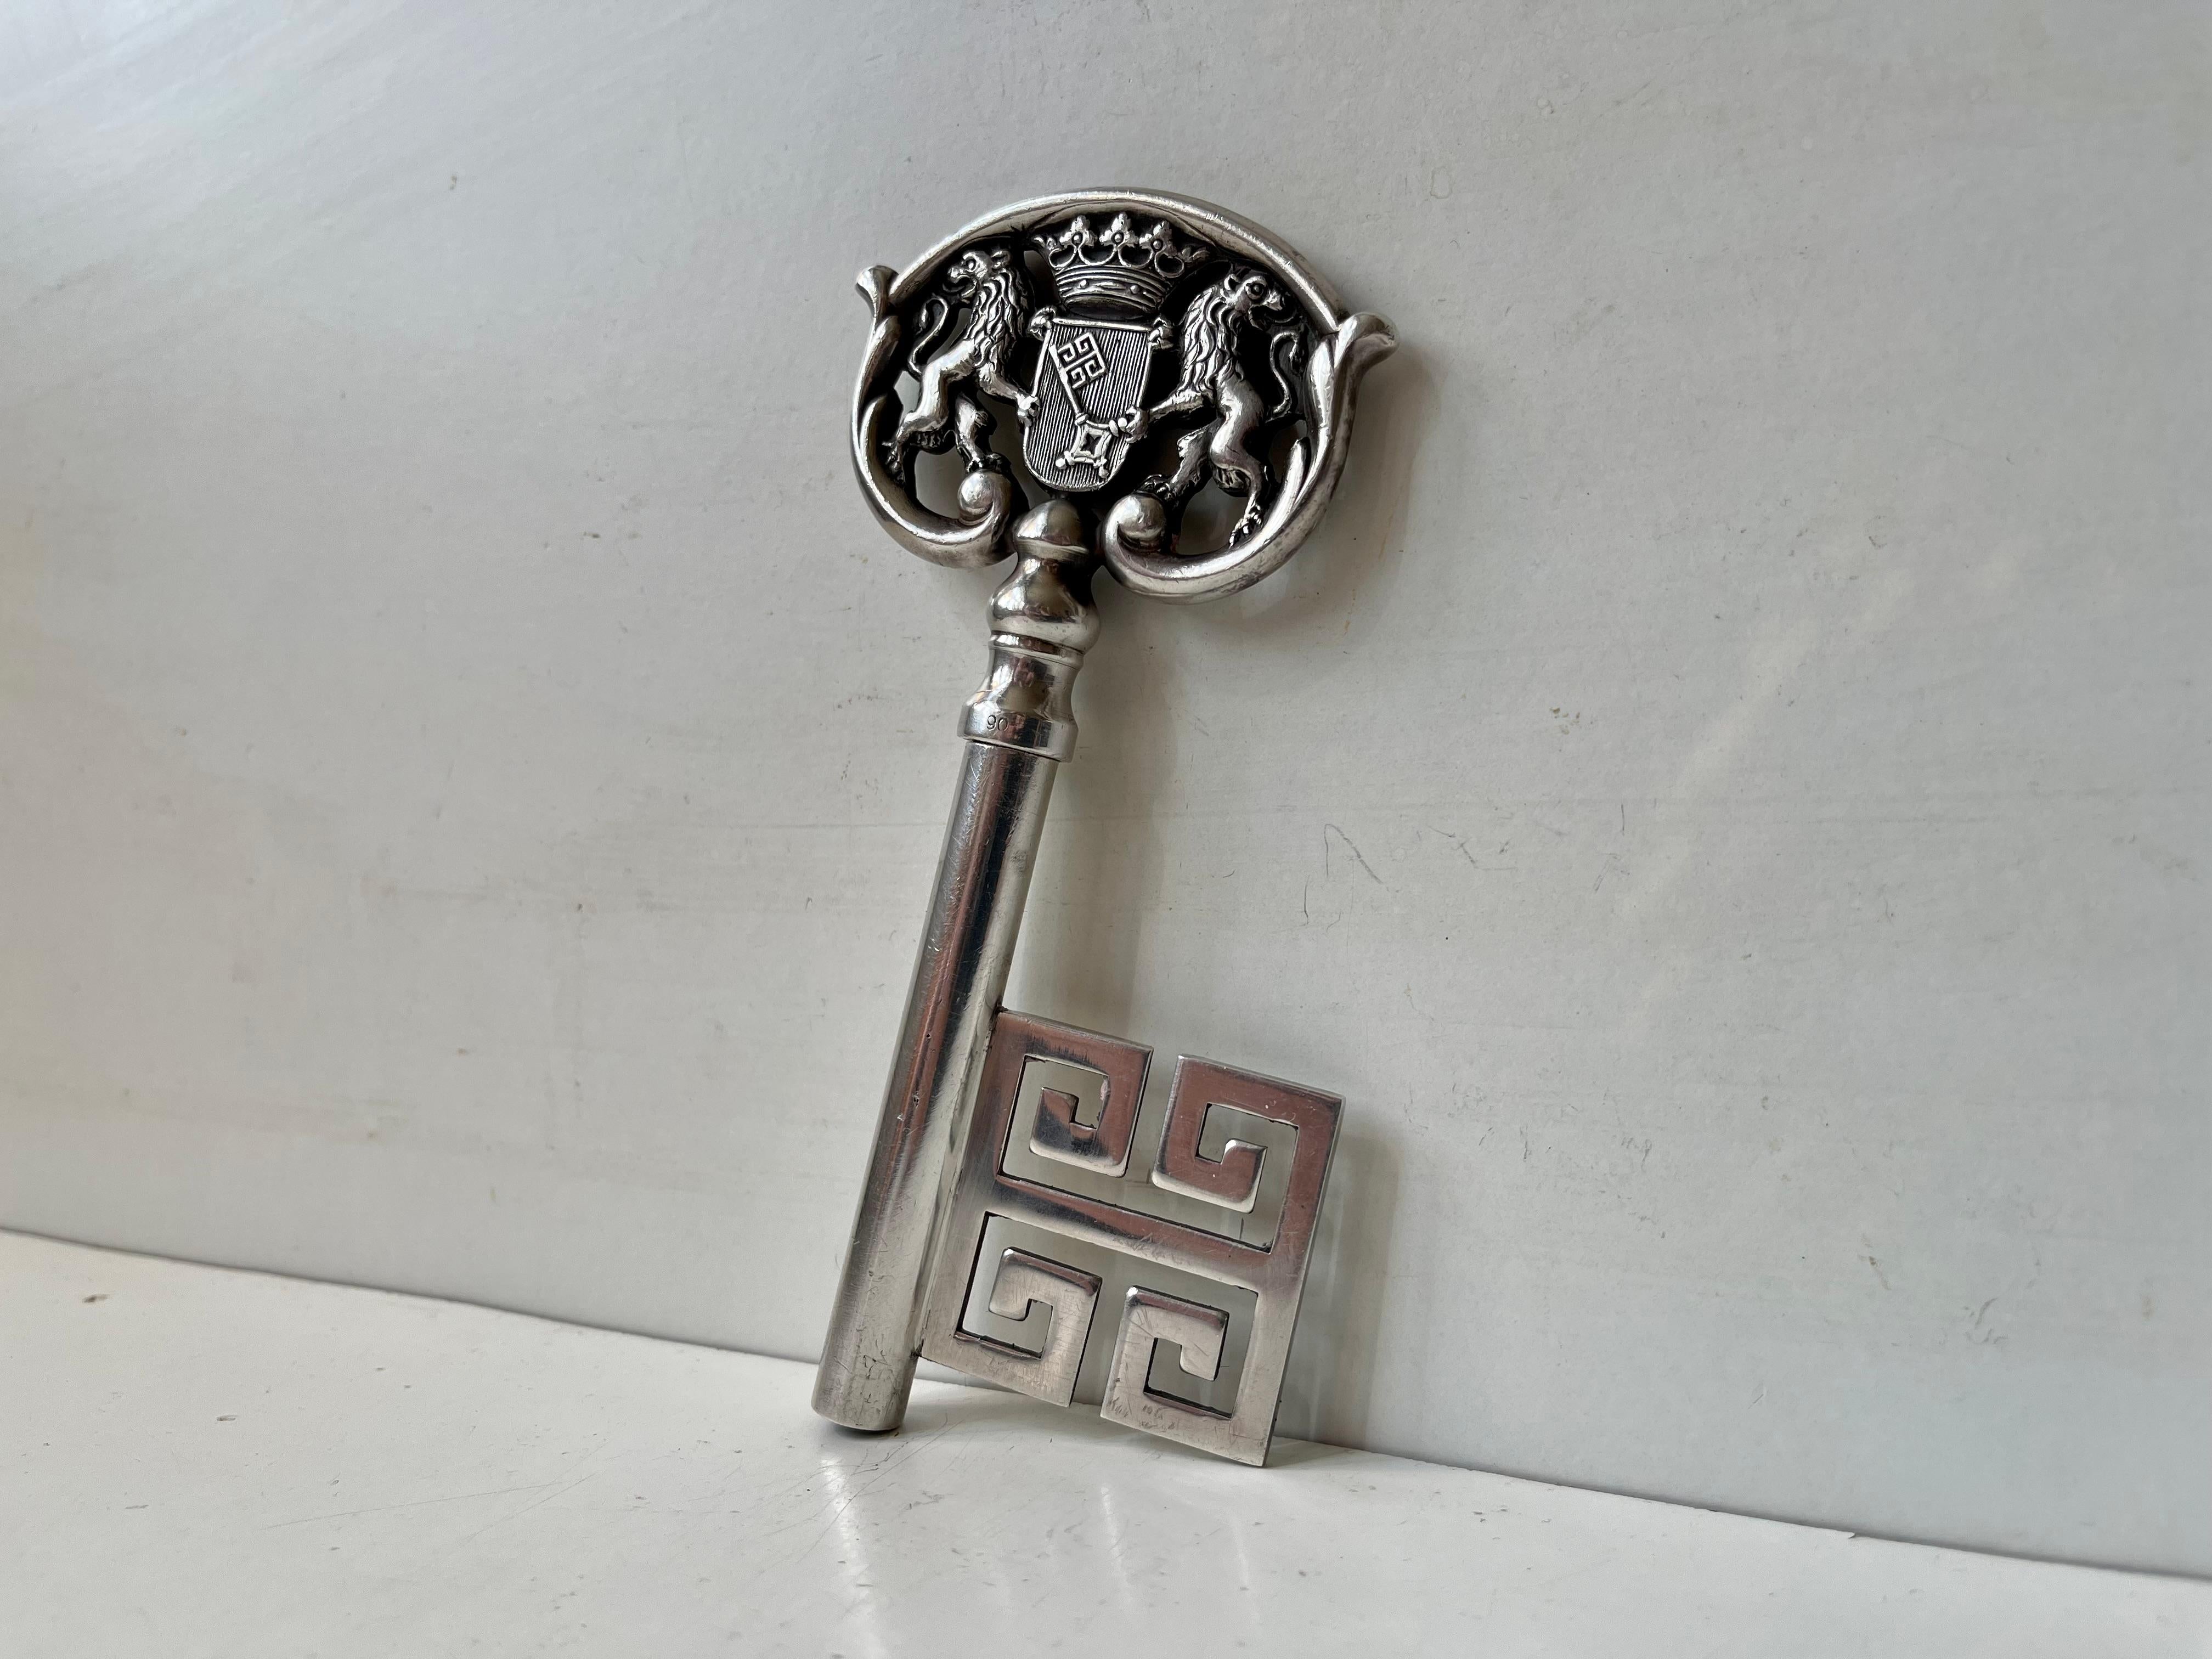 Vintage Heavily silver-plated (hallmark for 90 microns), very stylish cellar key-corkscrew depicting the Bremen coat of arms featuring the Bremer Schlüssel (Bremen Key). It originates from the German Town Bremen and are also known as 